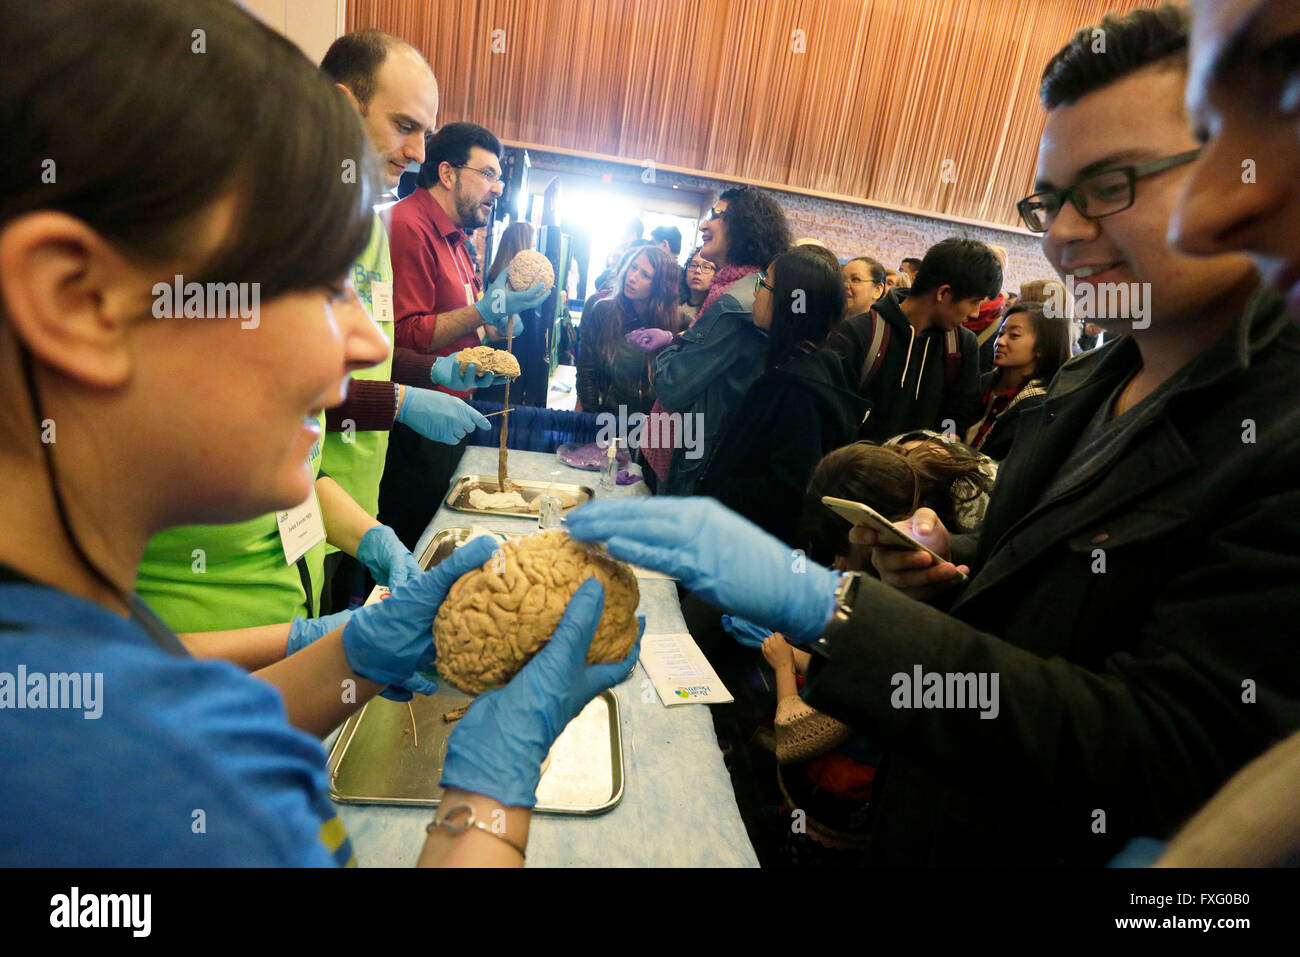 Vancouver. 16th Apr, 2016. A resident feels the texture of a human brain specimen at the Brain Health Fair held at Vancouver Convention Centre in Vancouver, Canada, April, 15, 2016. The Brain Health Fair showcases different exhibits and interactive events by neurologists and brain health experts for the general public to learn more about the knowledge of brain organ and the brain's related health issues. © Liang sen/Xinhua/Alamy Live News Stock Photo